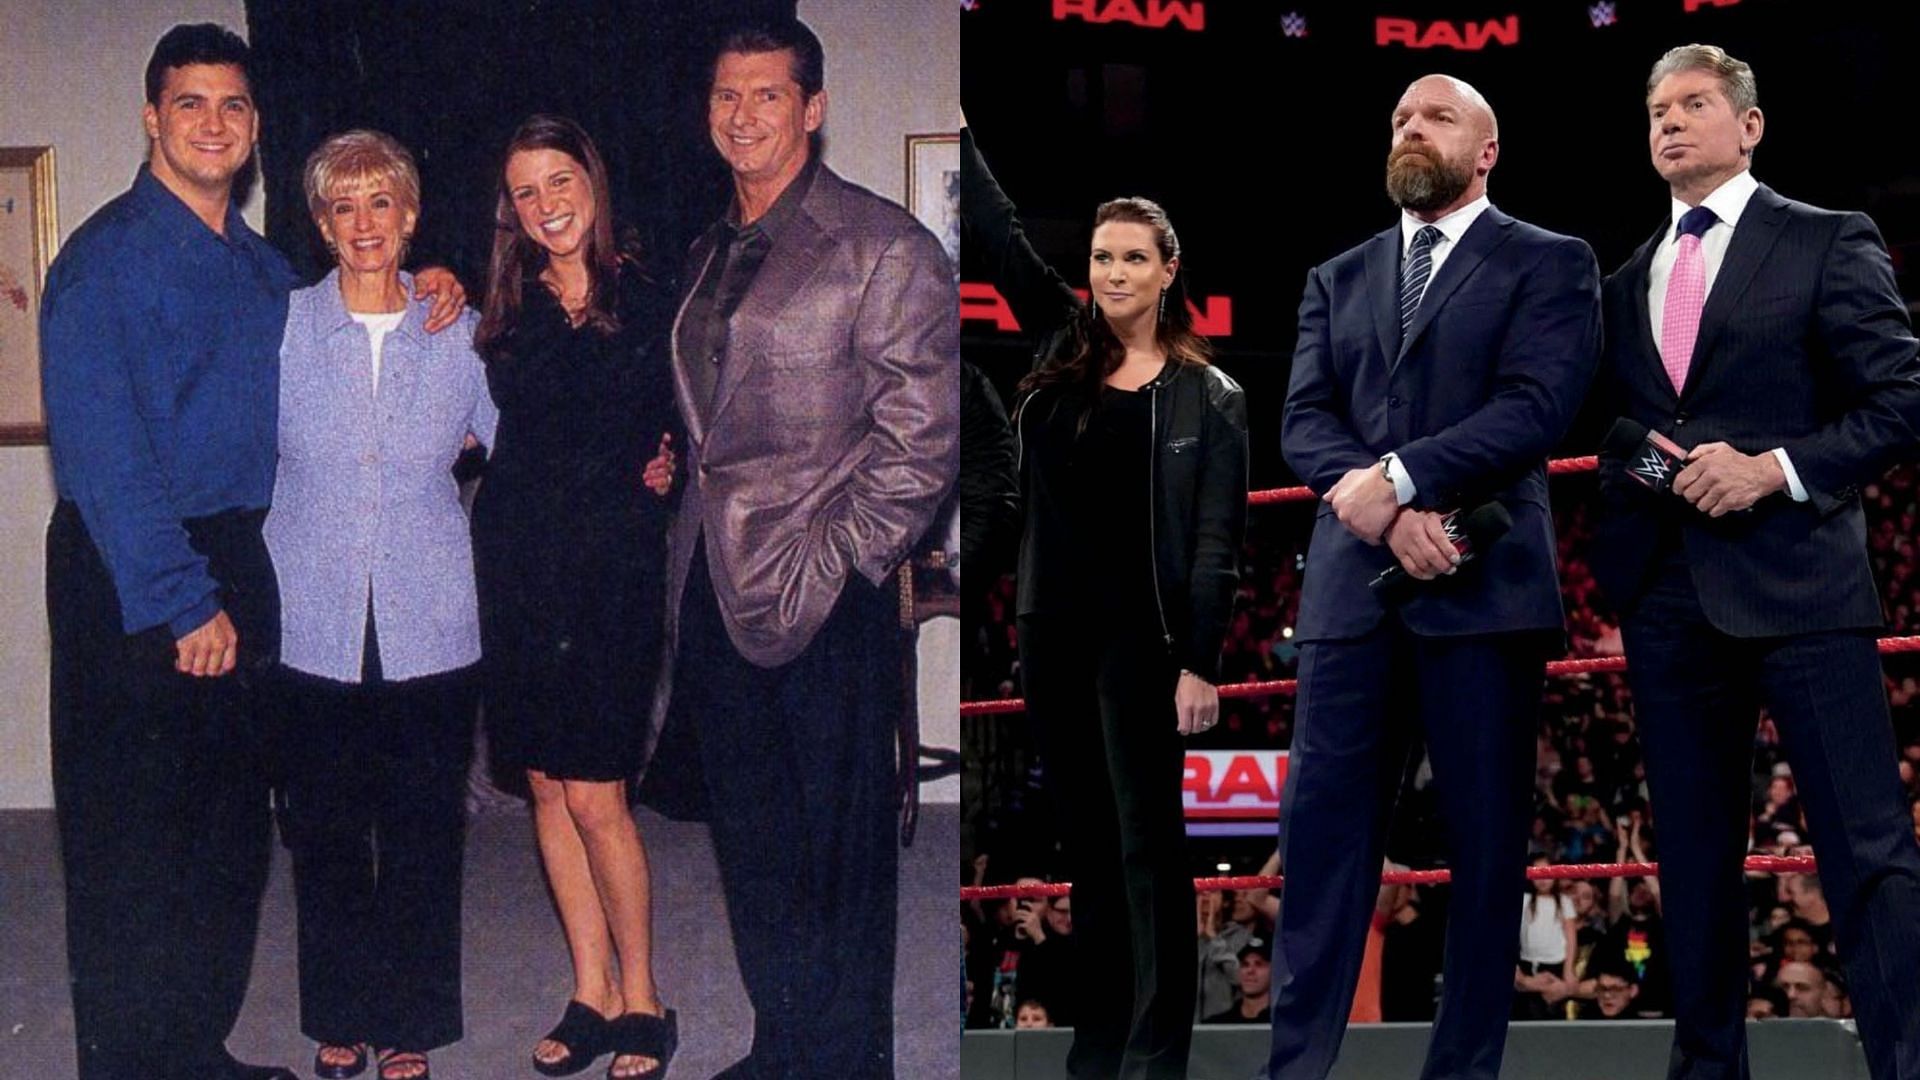 Several rumors have surrounded WWE&#039;s McMahon family